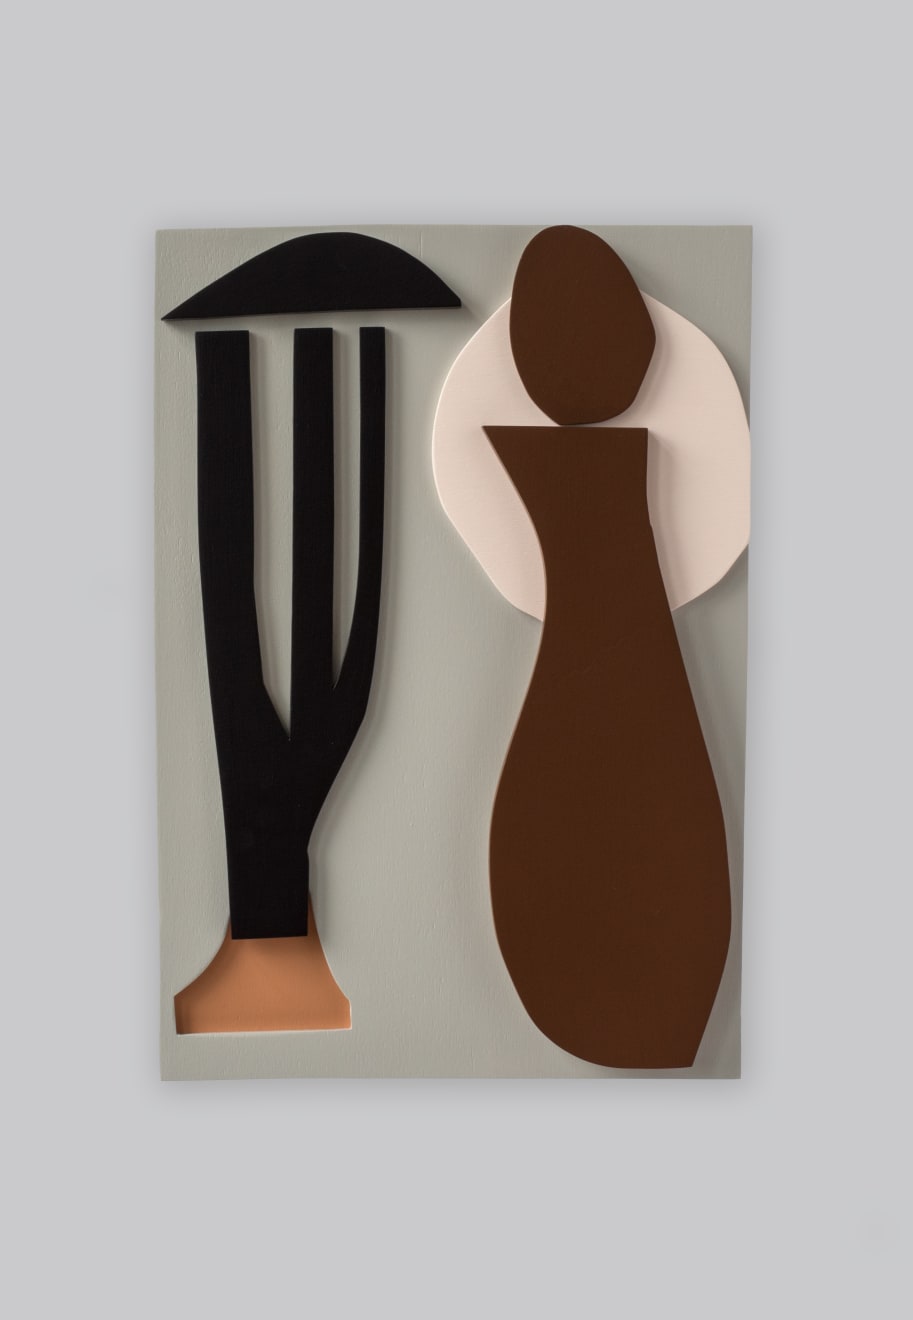 Marie Bernard Amphora Assembled Painted Plywood Limited Edition 8 41.5 x 29 x 3.4 cm $940